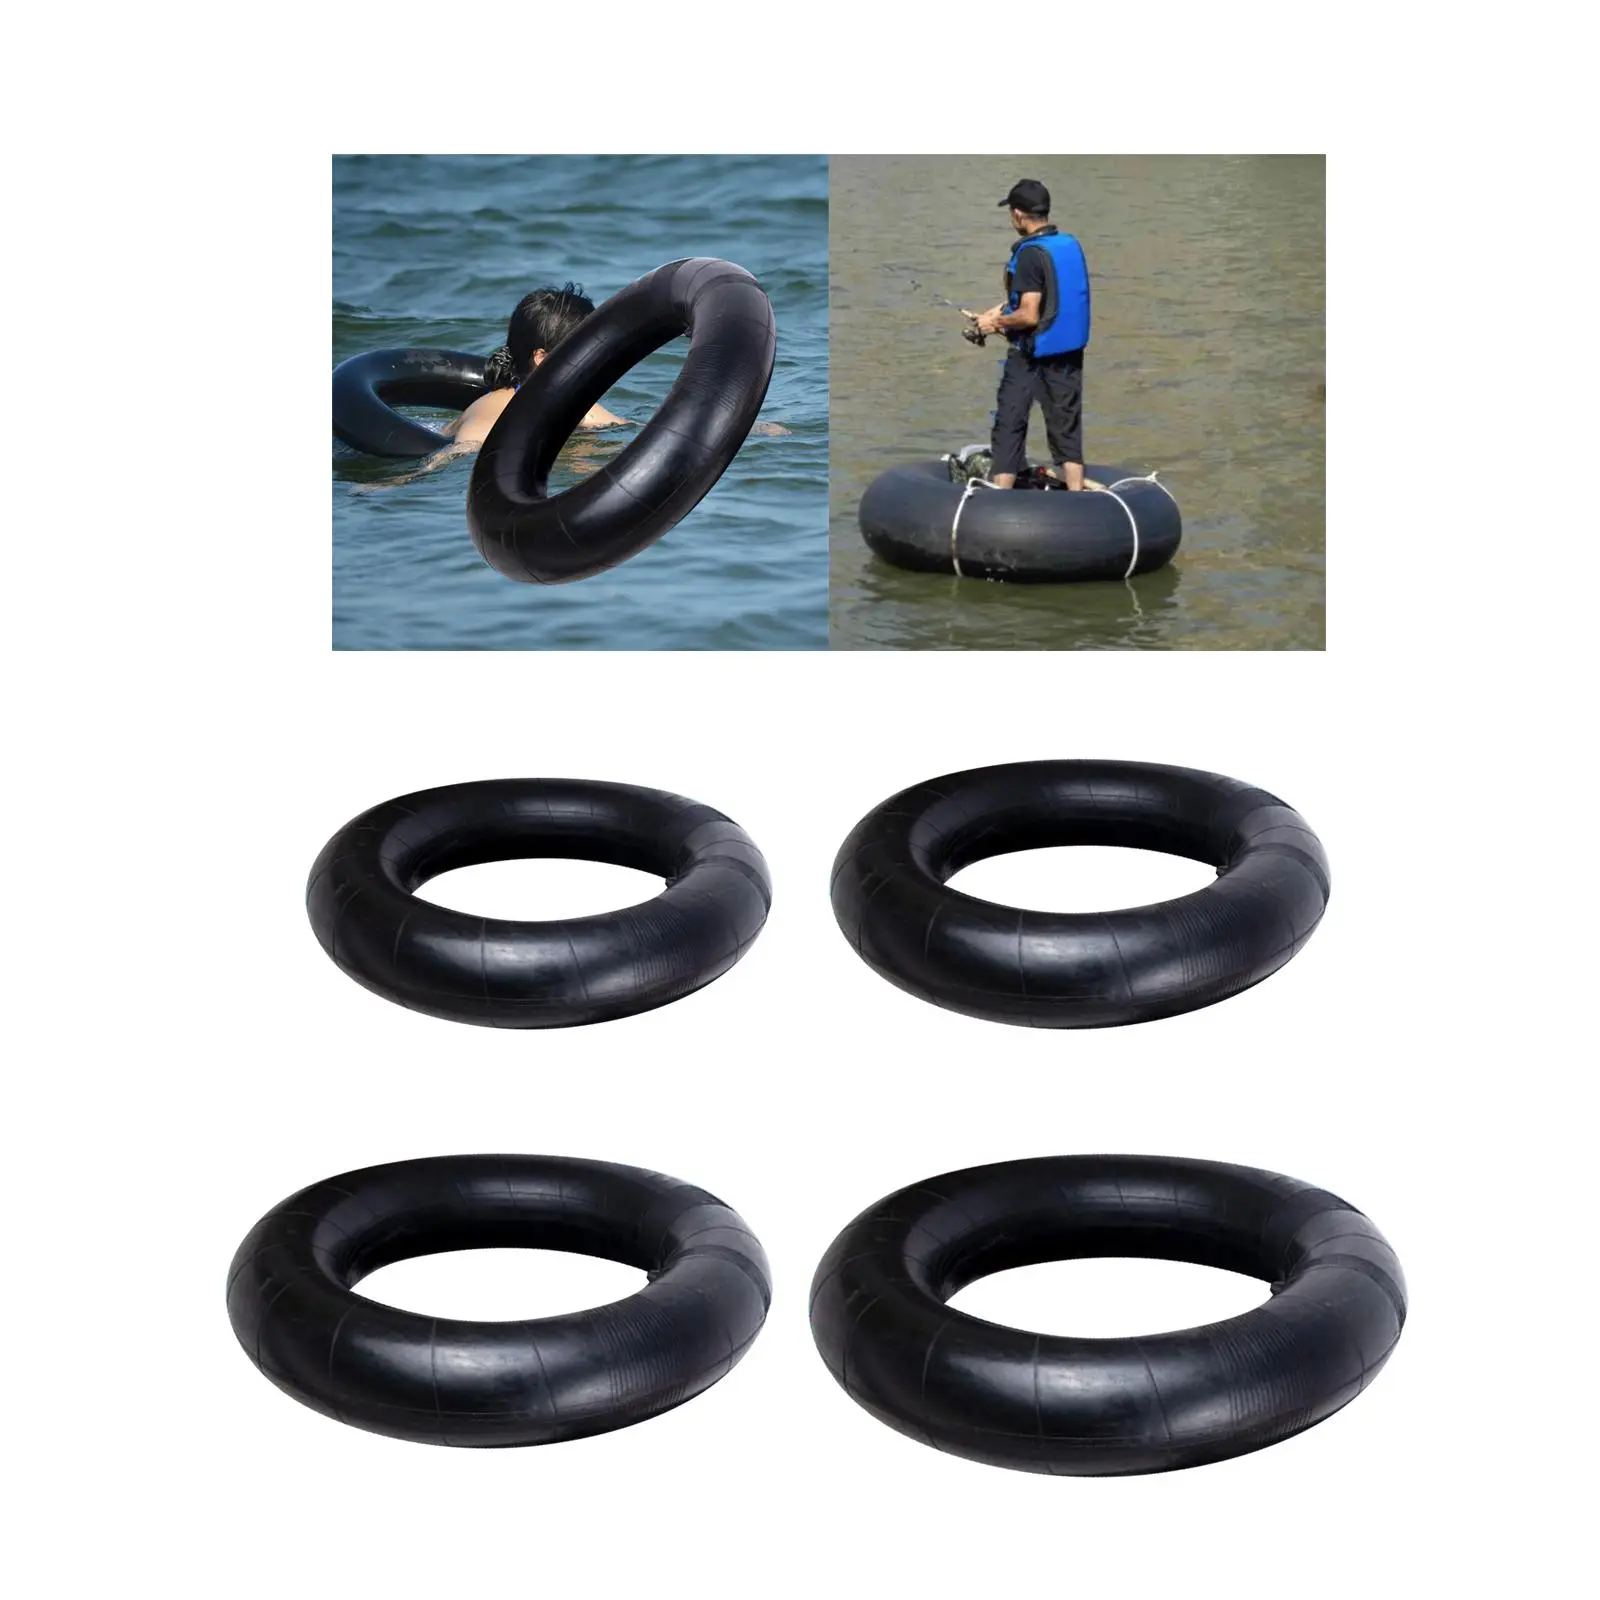 River Tube for Floating for Adults Heavy Duty Inflatable Floating Tube Raft Pool